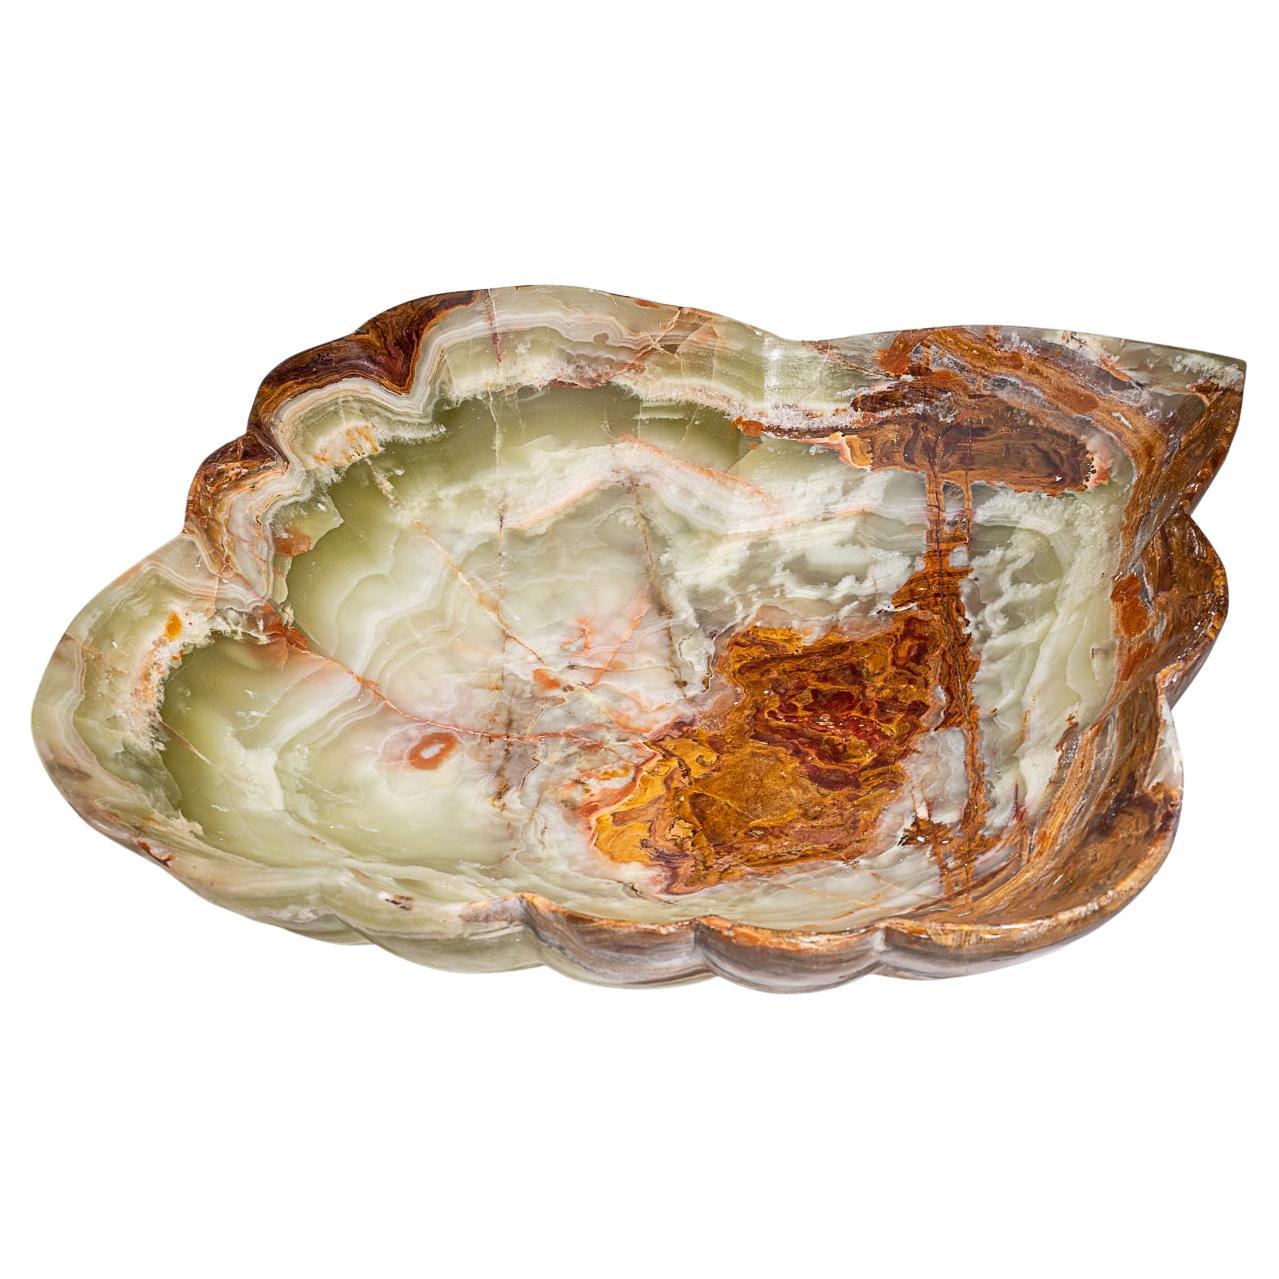 Large Polished Green Onyx Decorative Bowl from Mexico (15" x 15" x 4", 21.6 Lbs)